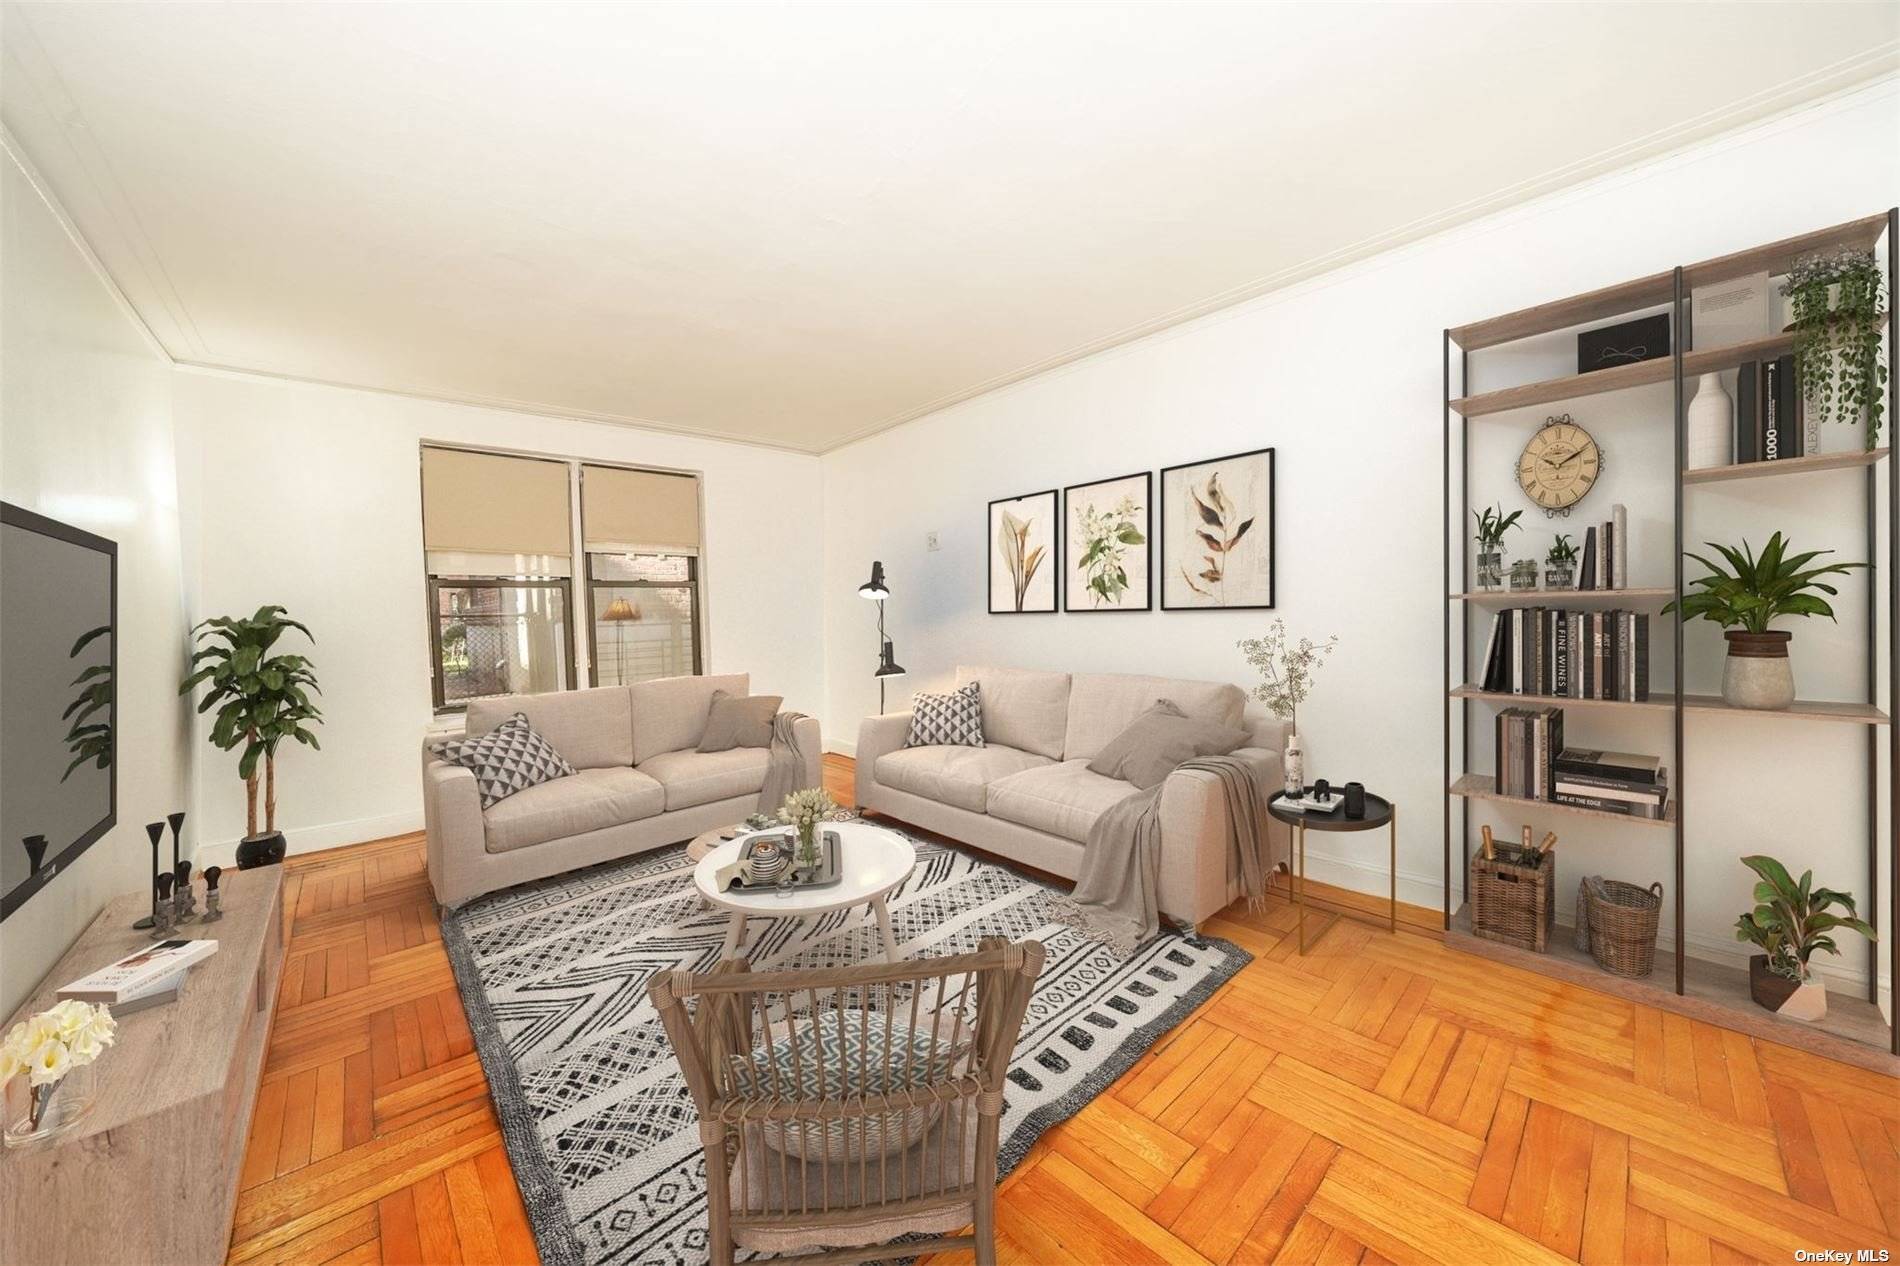 Welcome to Inwood ! First floor 1 bedroom apartment where you will enjoy the oversized living room, an eat in kitchen and beautiful Art Deco features that contribute to the ...